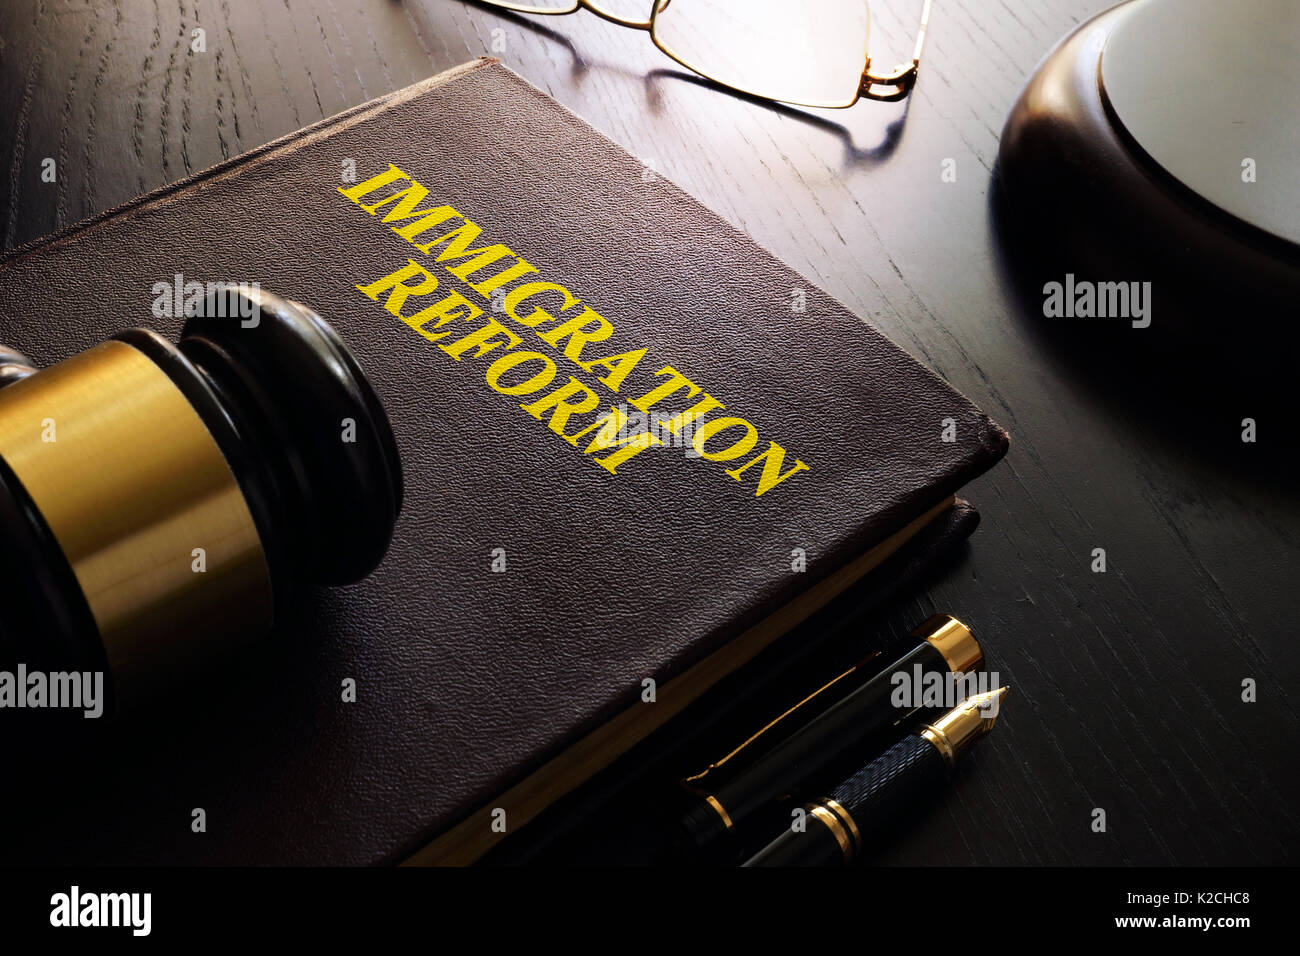 Book with title Immigration reform on a table. Stock Photo